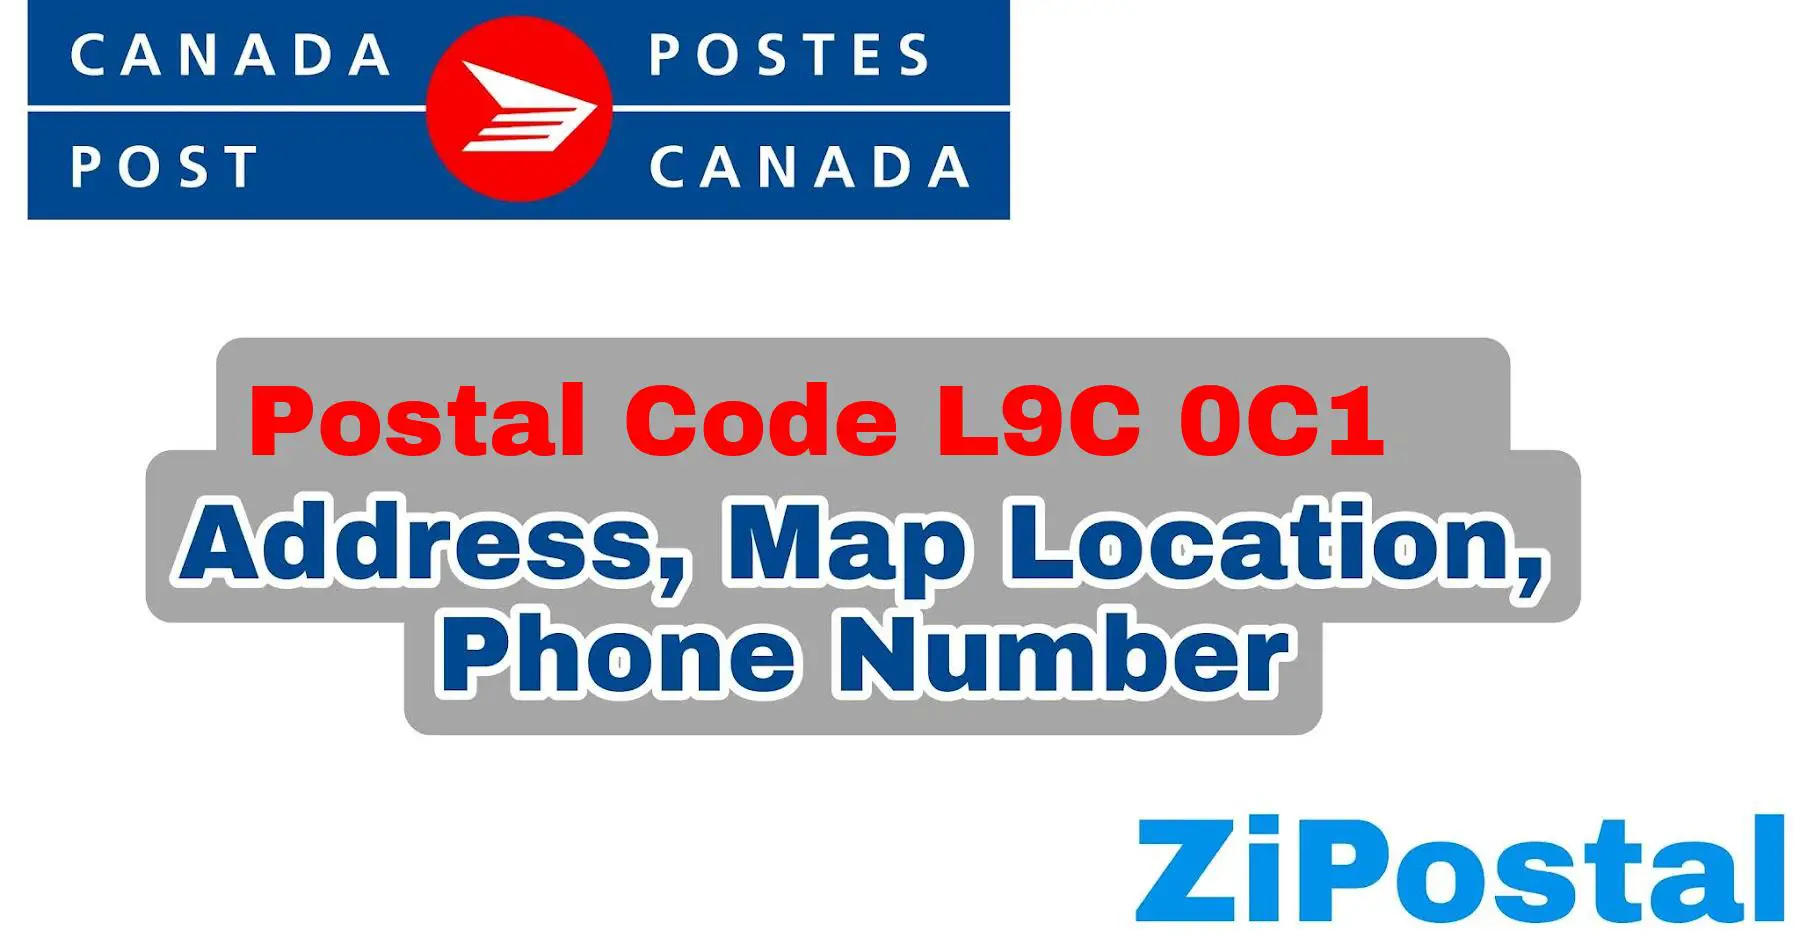 Postal Code L9C 0C1 Address Map Location and Phone Number